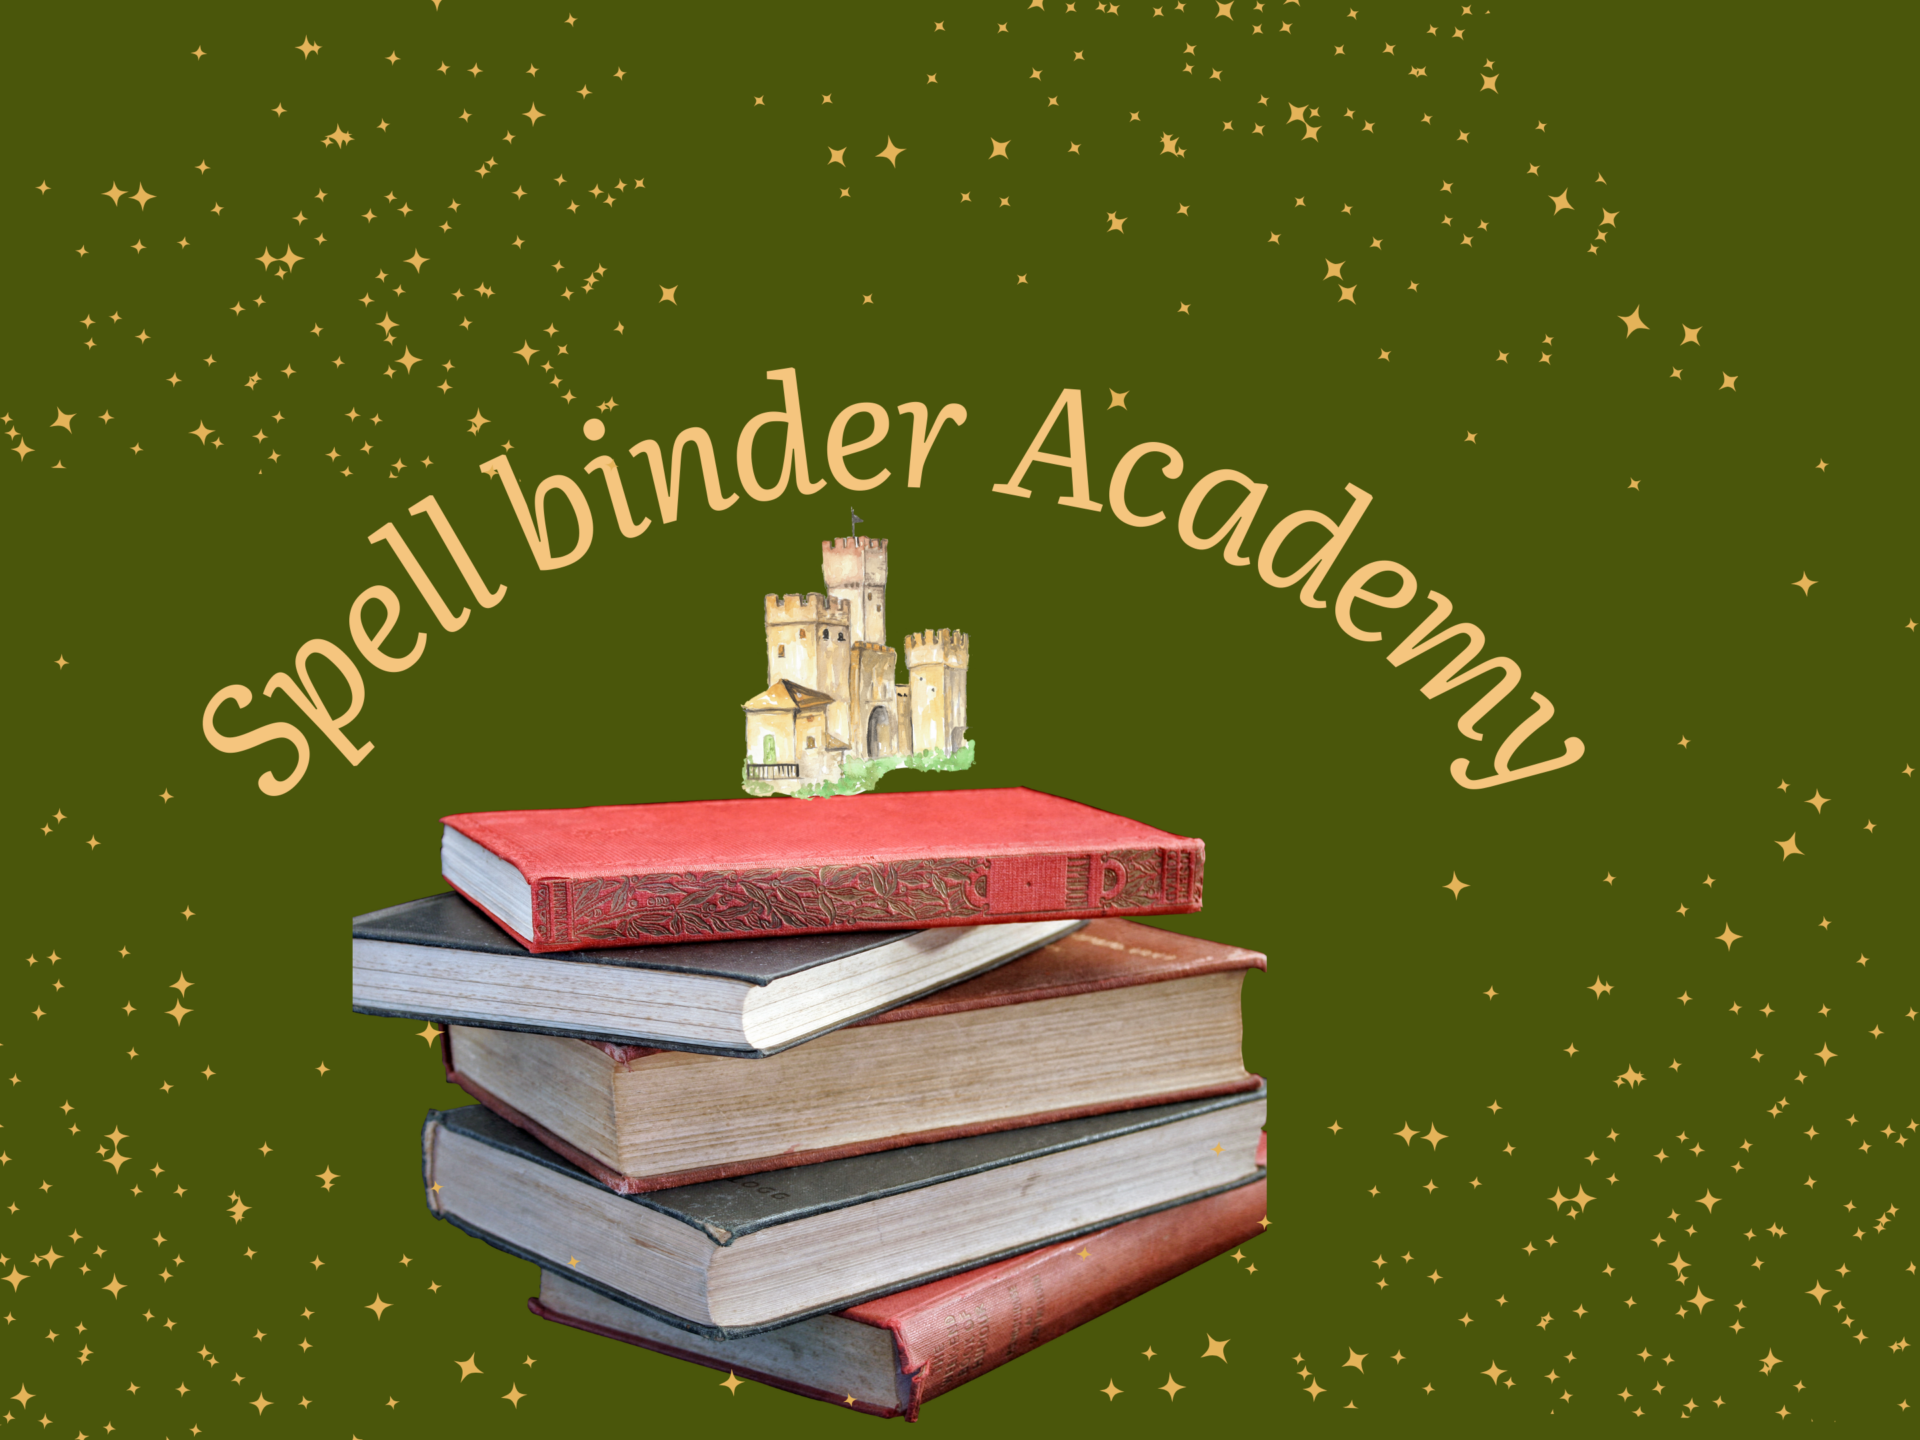 Image of Dungeons and Dragons: Spellbinder Academy event